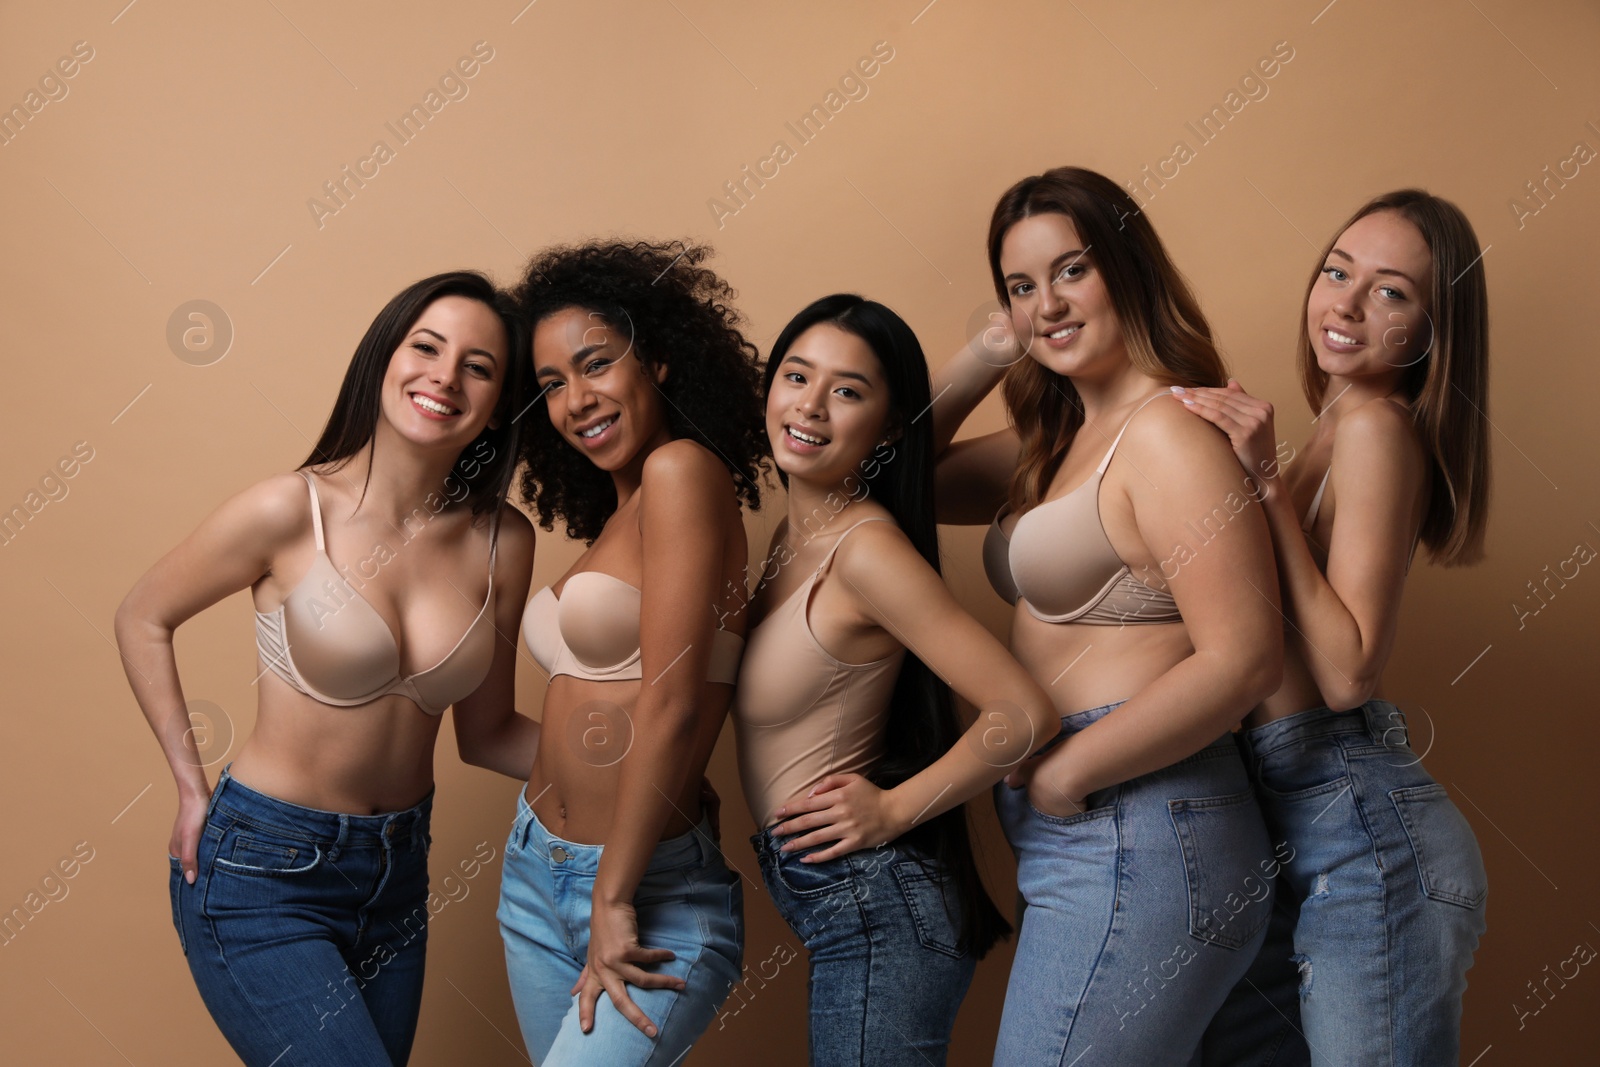 Photo of Group of women with different body types in jeans and underwear on beige background